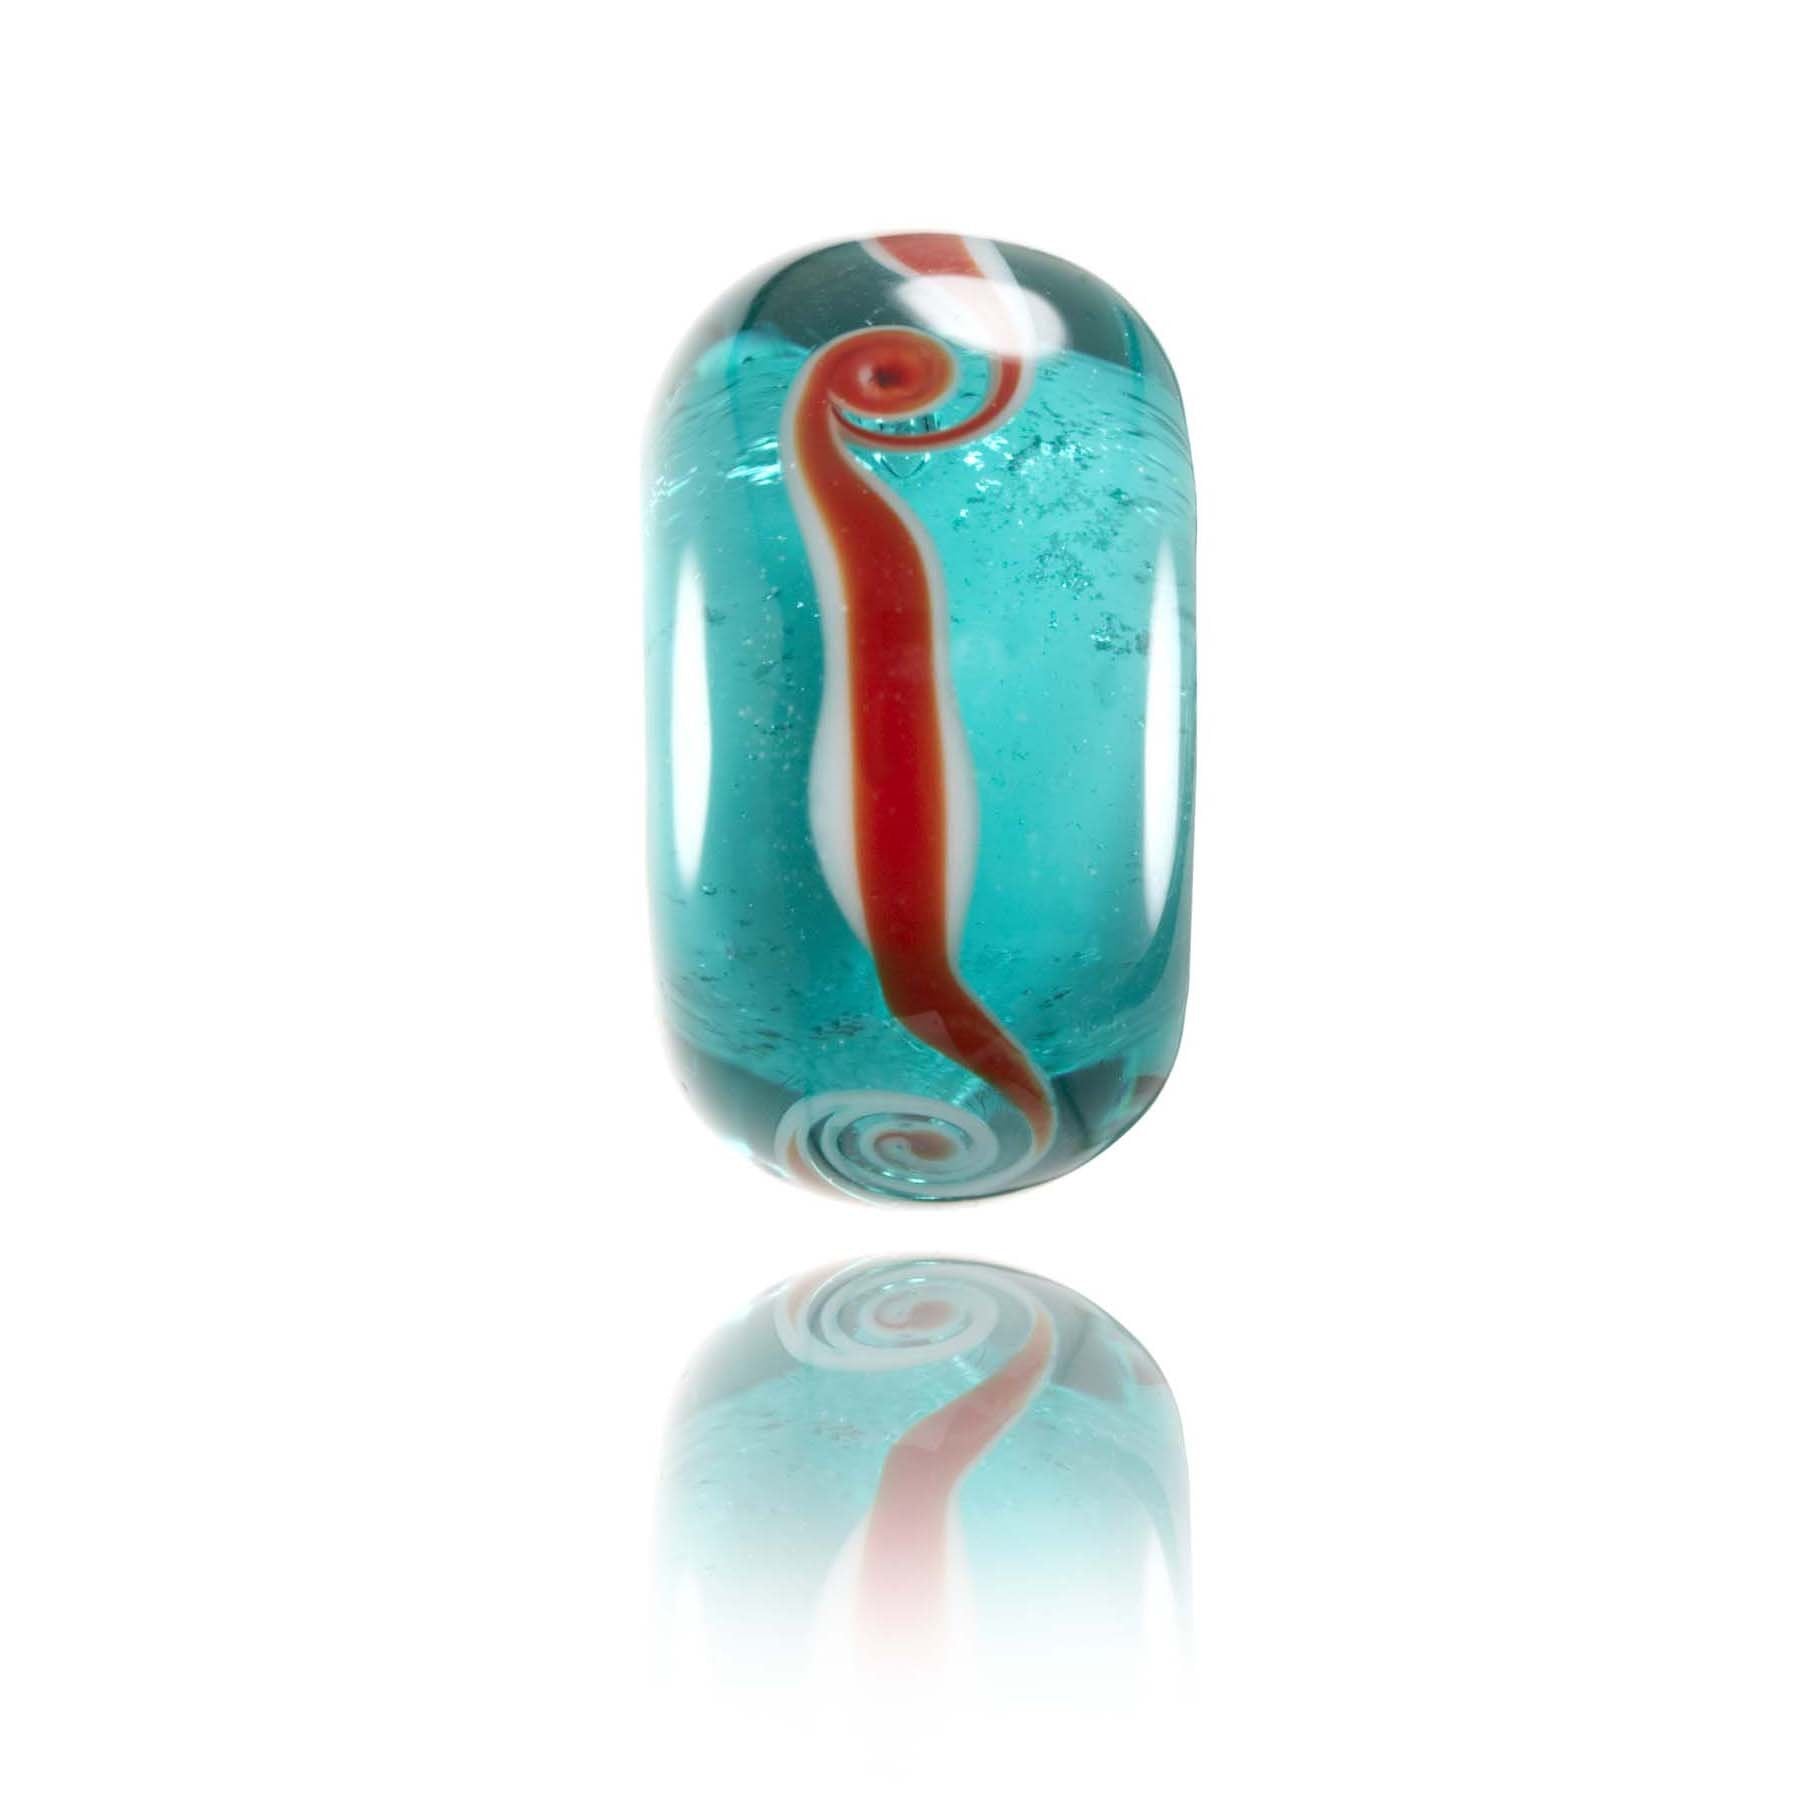 Teal Murano glass bead wrapped with red and white stripe around the middle inpsired by the beach at Angourie Point in Australia.